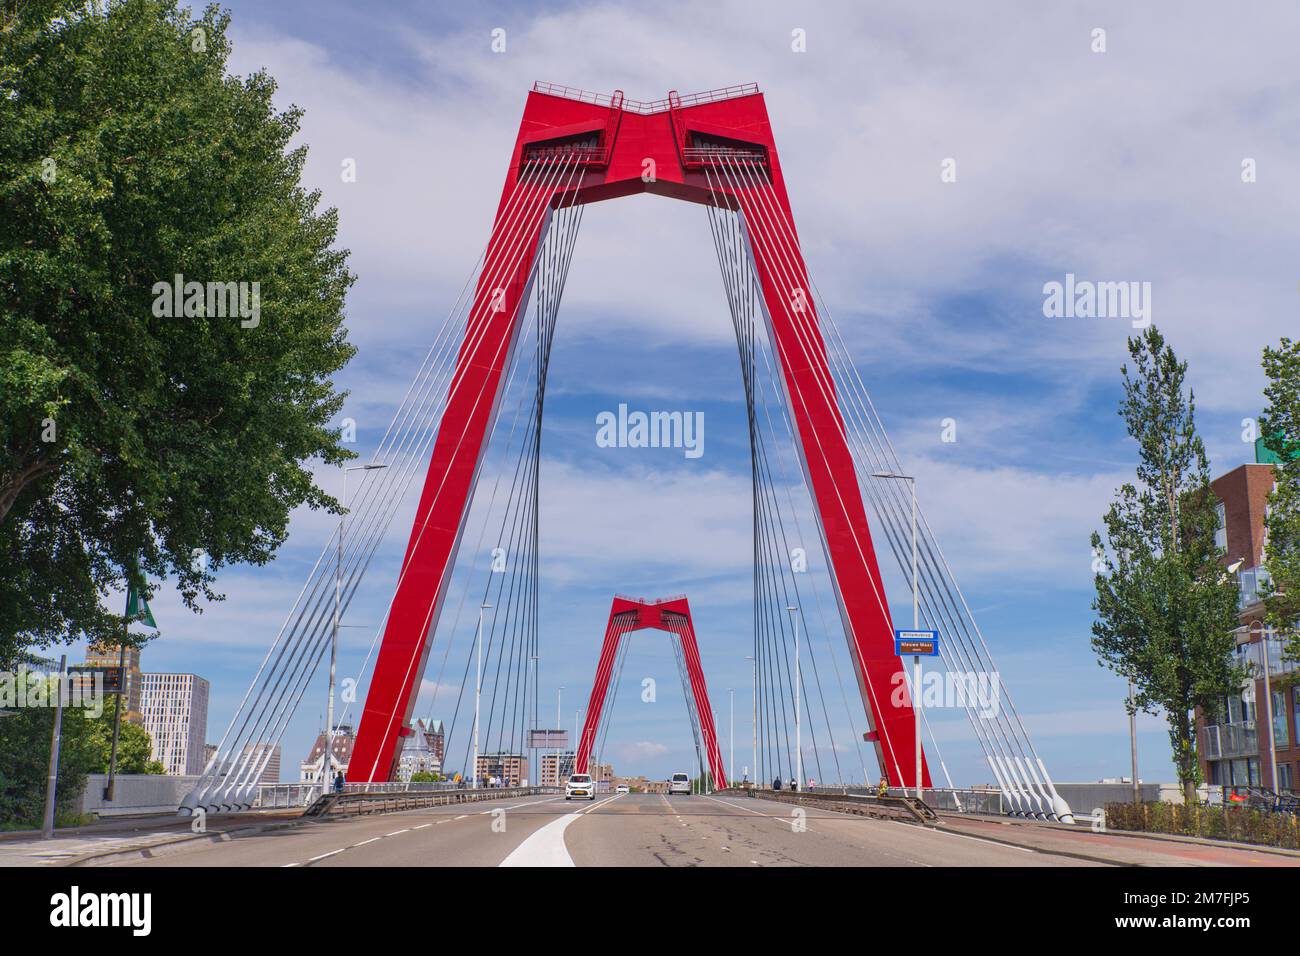 Holland, Rotterdam, Willemsbrug or William's Bridge, a cable stayed bridge built in 1981 spanning the Nieuwe Maas river and named after King Willem III of the Netherlands. Stock Photo